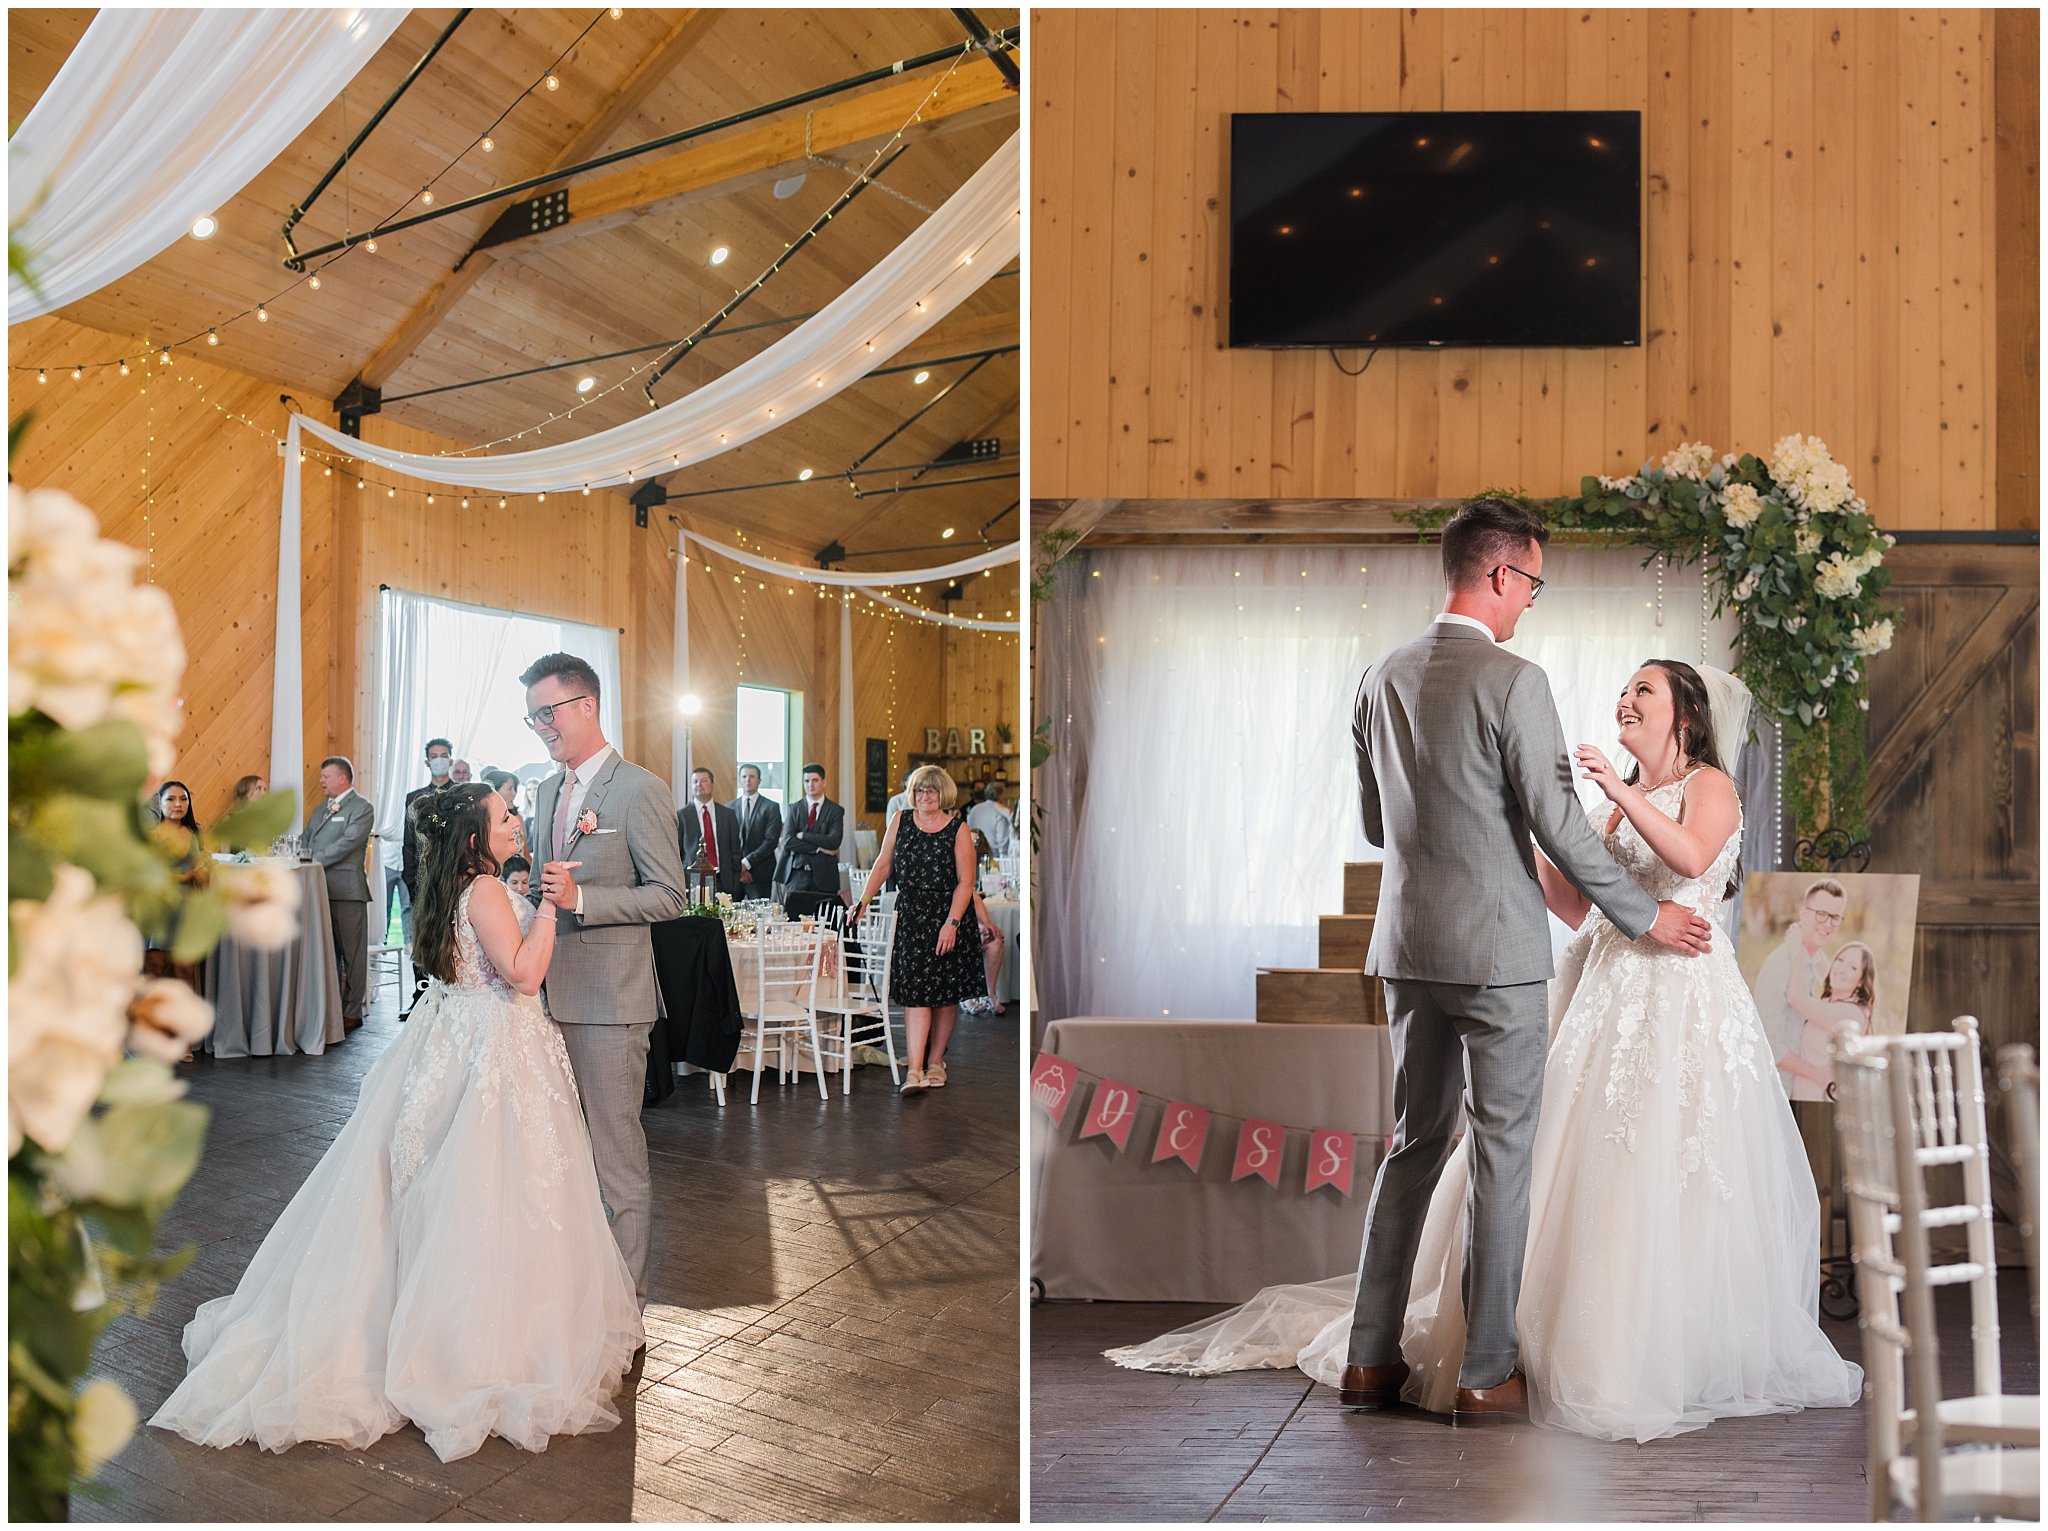 First dance in barn | Oak Hills Utah Dusty Rose and Gray Summer Wedding | Jessie and Dallin Photography